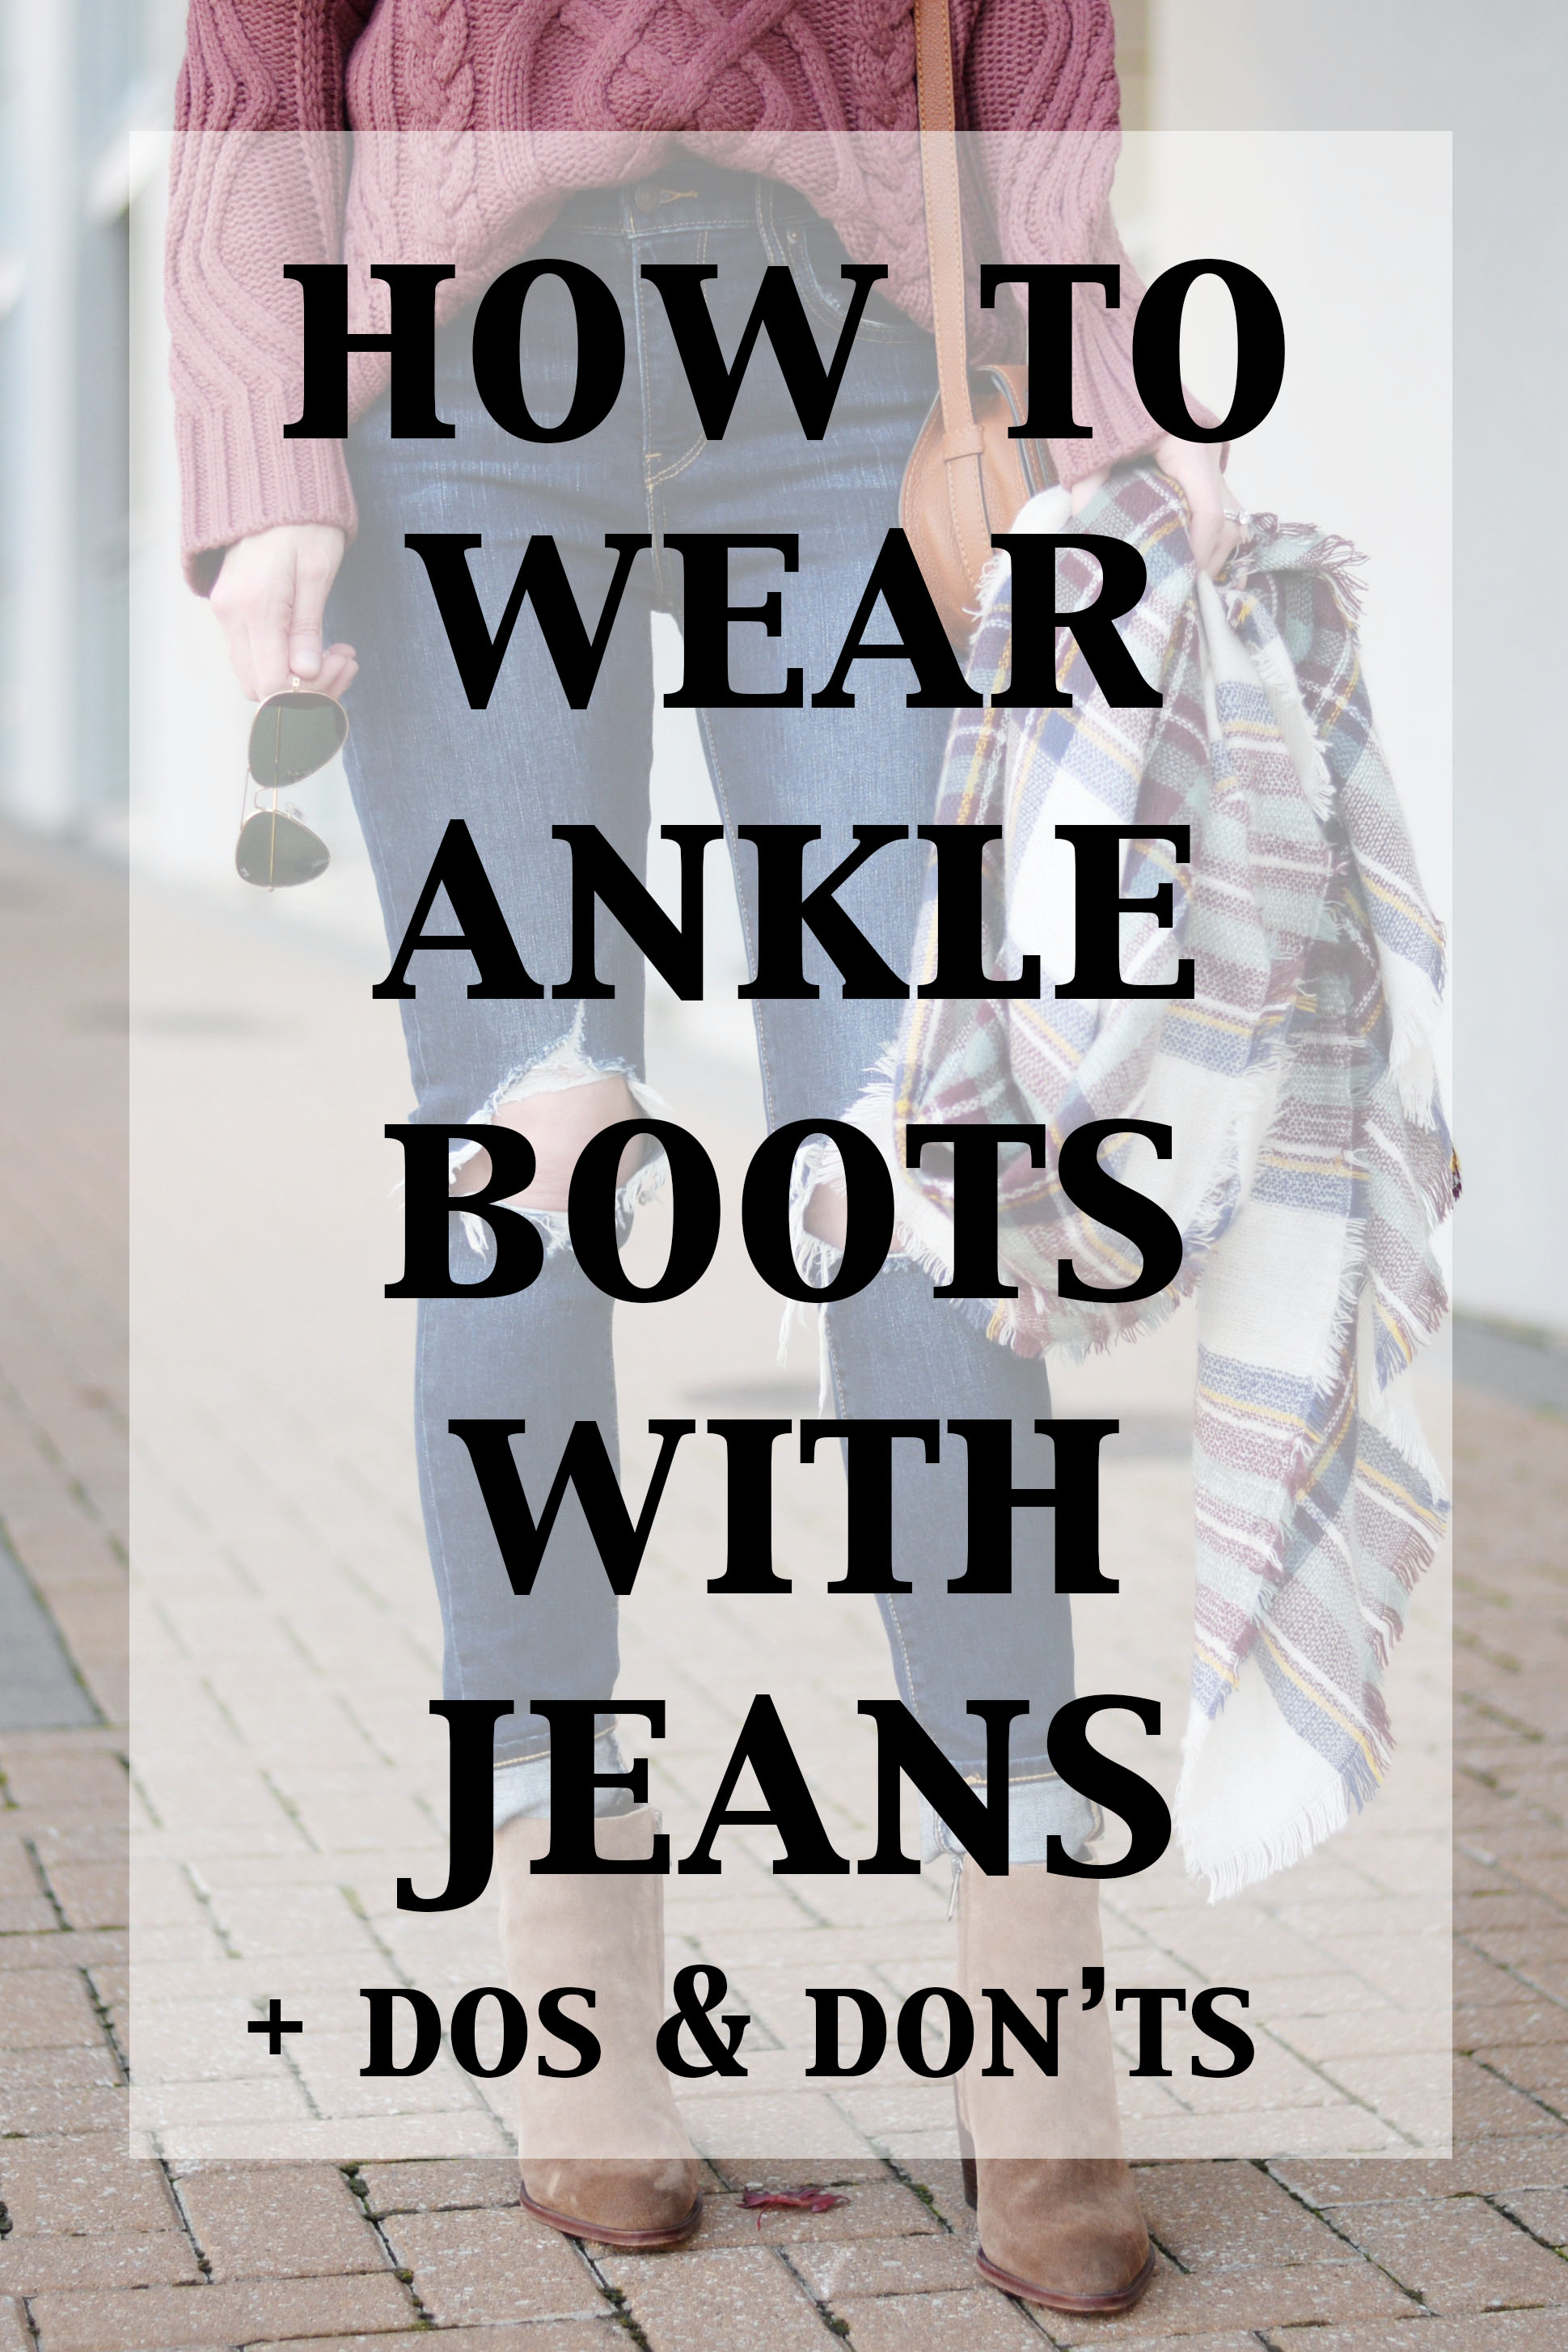 How to Wear Ankle Boots with Jeans - Dos & Don'ts - Straight A Style